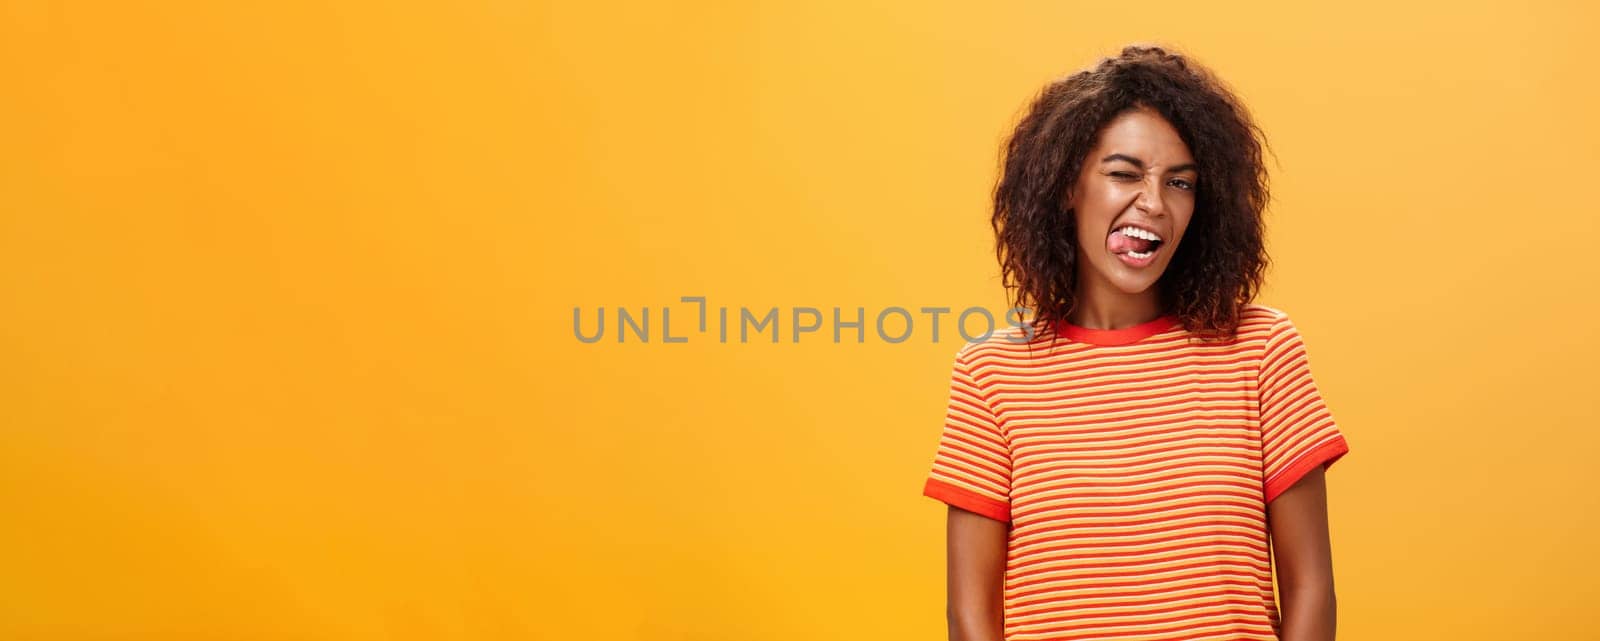 Portrait of daring and emotive confident flirty woman with afro hairstyle winking joyfully showing tongue posing carefree and enthusiastic against orange background flirting with hot guy. Copy space